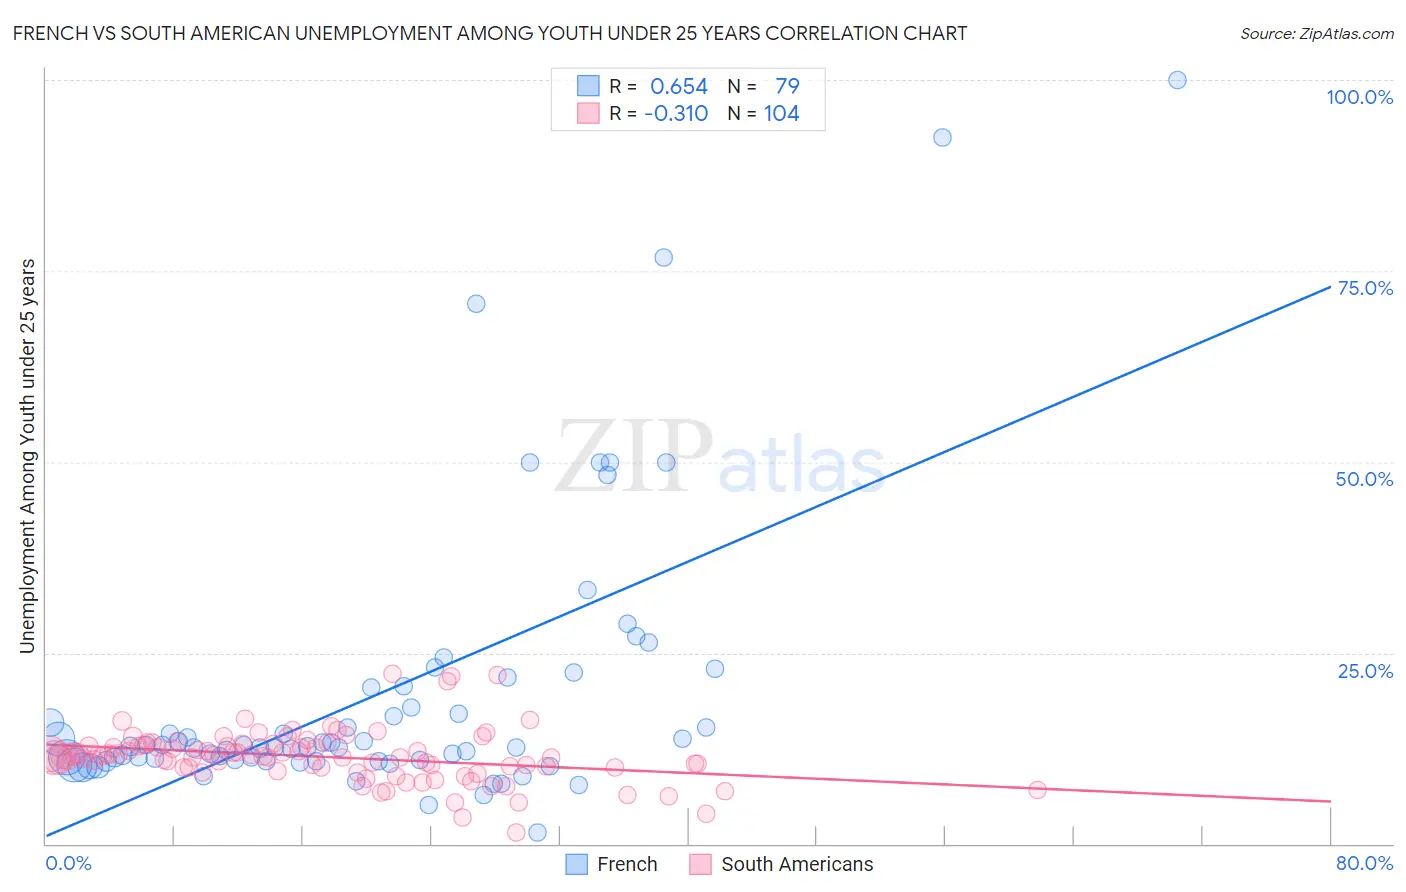 French vs South American Unemployment Among Youth under 25 years